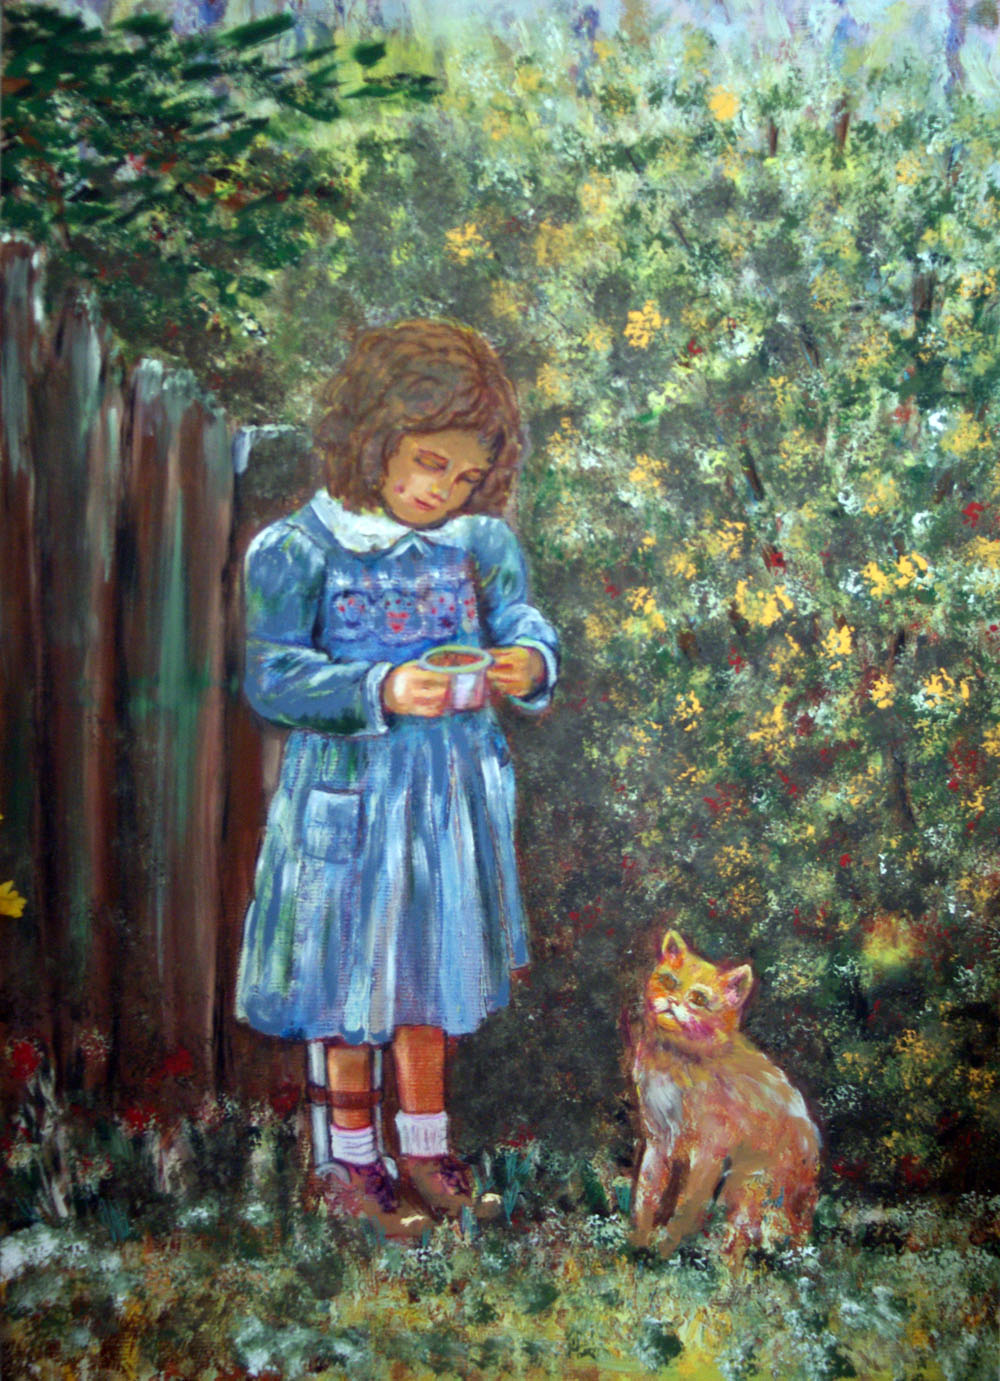 painting of girl with brace on leg with orange cat